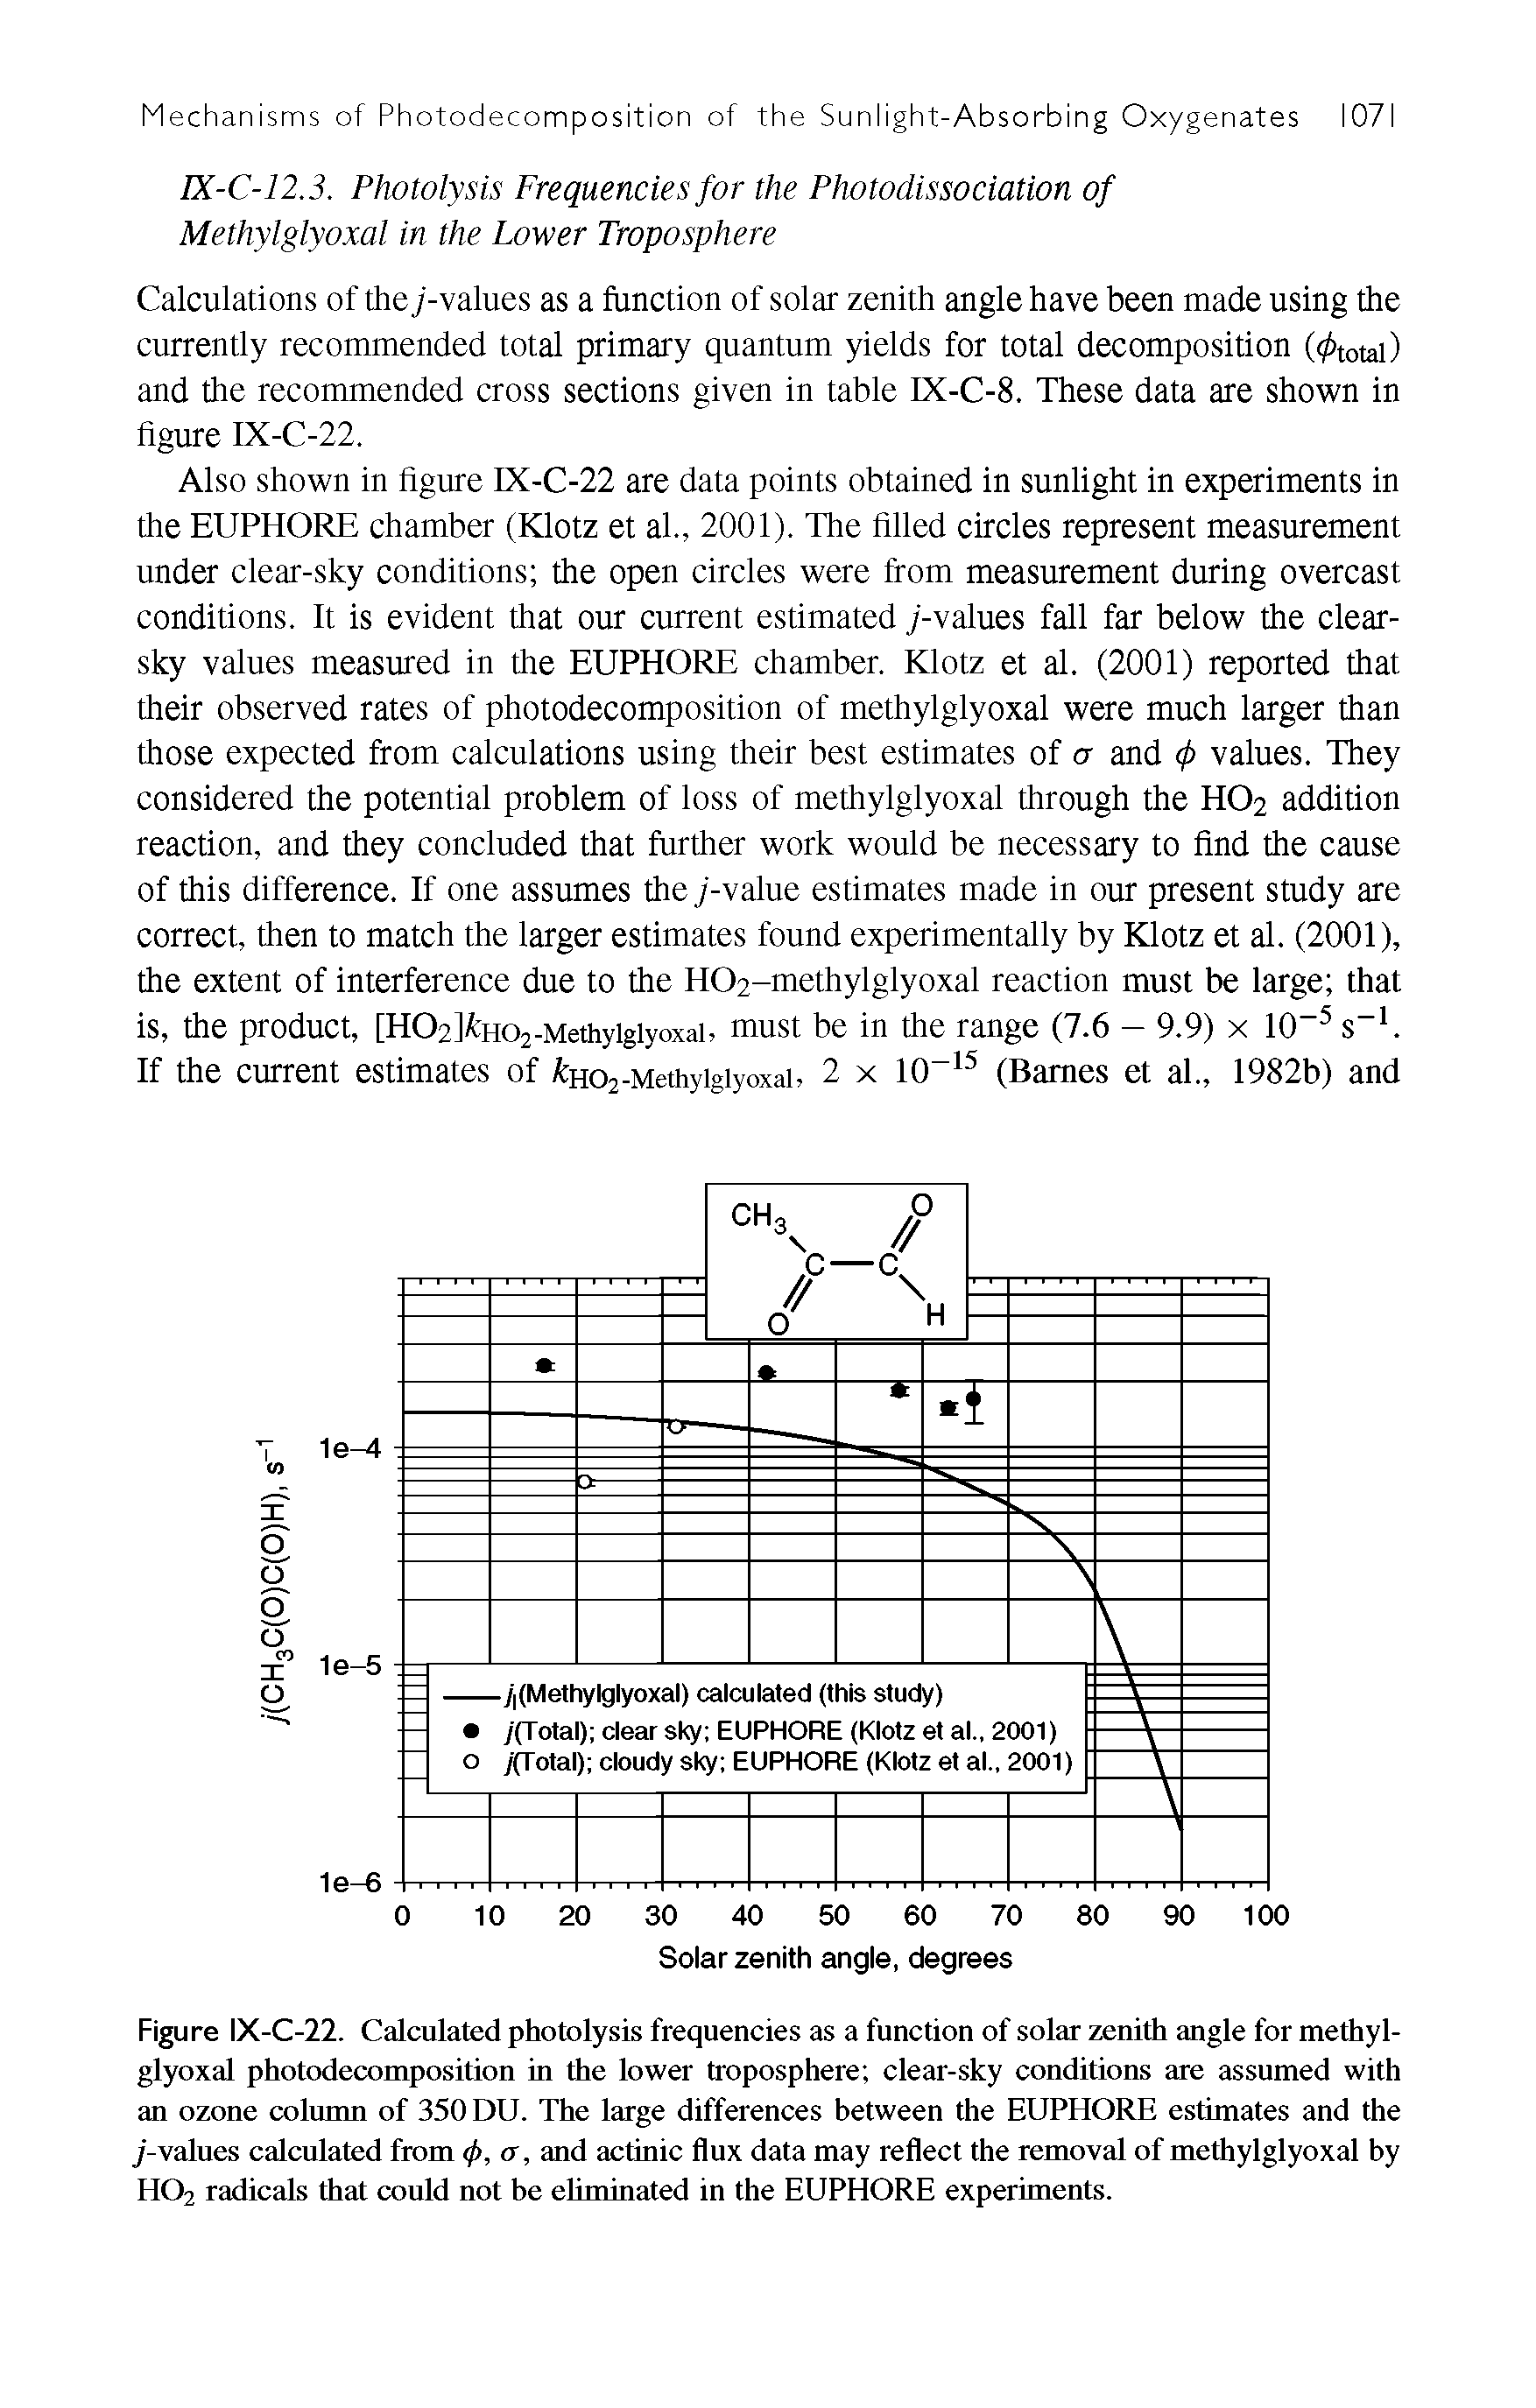 Figure IX-C-22. Calculated photolysis frequencies as a function of solar zenith angle for methylglyoxal photodecomposition in the lower troposphere clear-sky conditions are assumed with an ozone column of 350 DU. The large differences between the EUPHORE estimates and the y-values calculated from f, a, and actinic flux data may reflect the removal of methylglyoxal by HO2 radicals that could not be eliminated in the EUPHORE experiments.